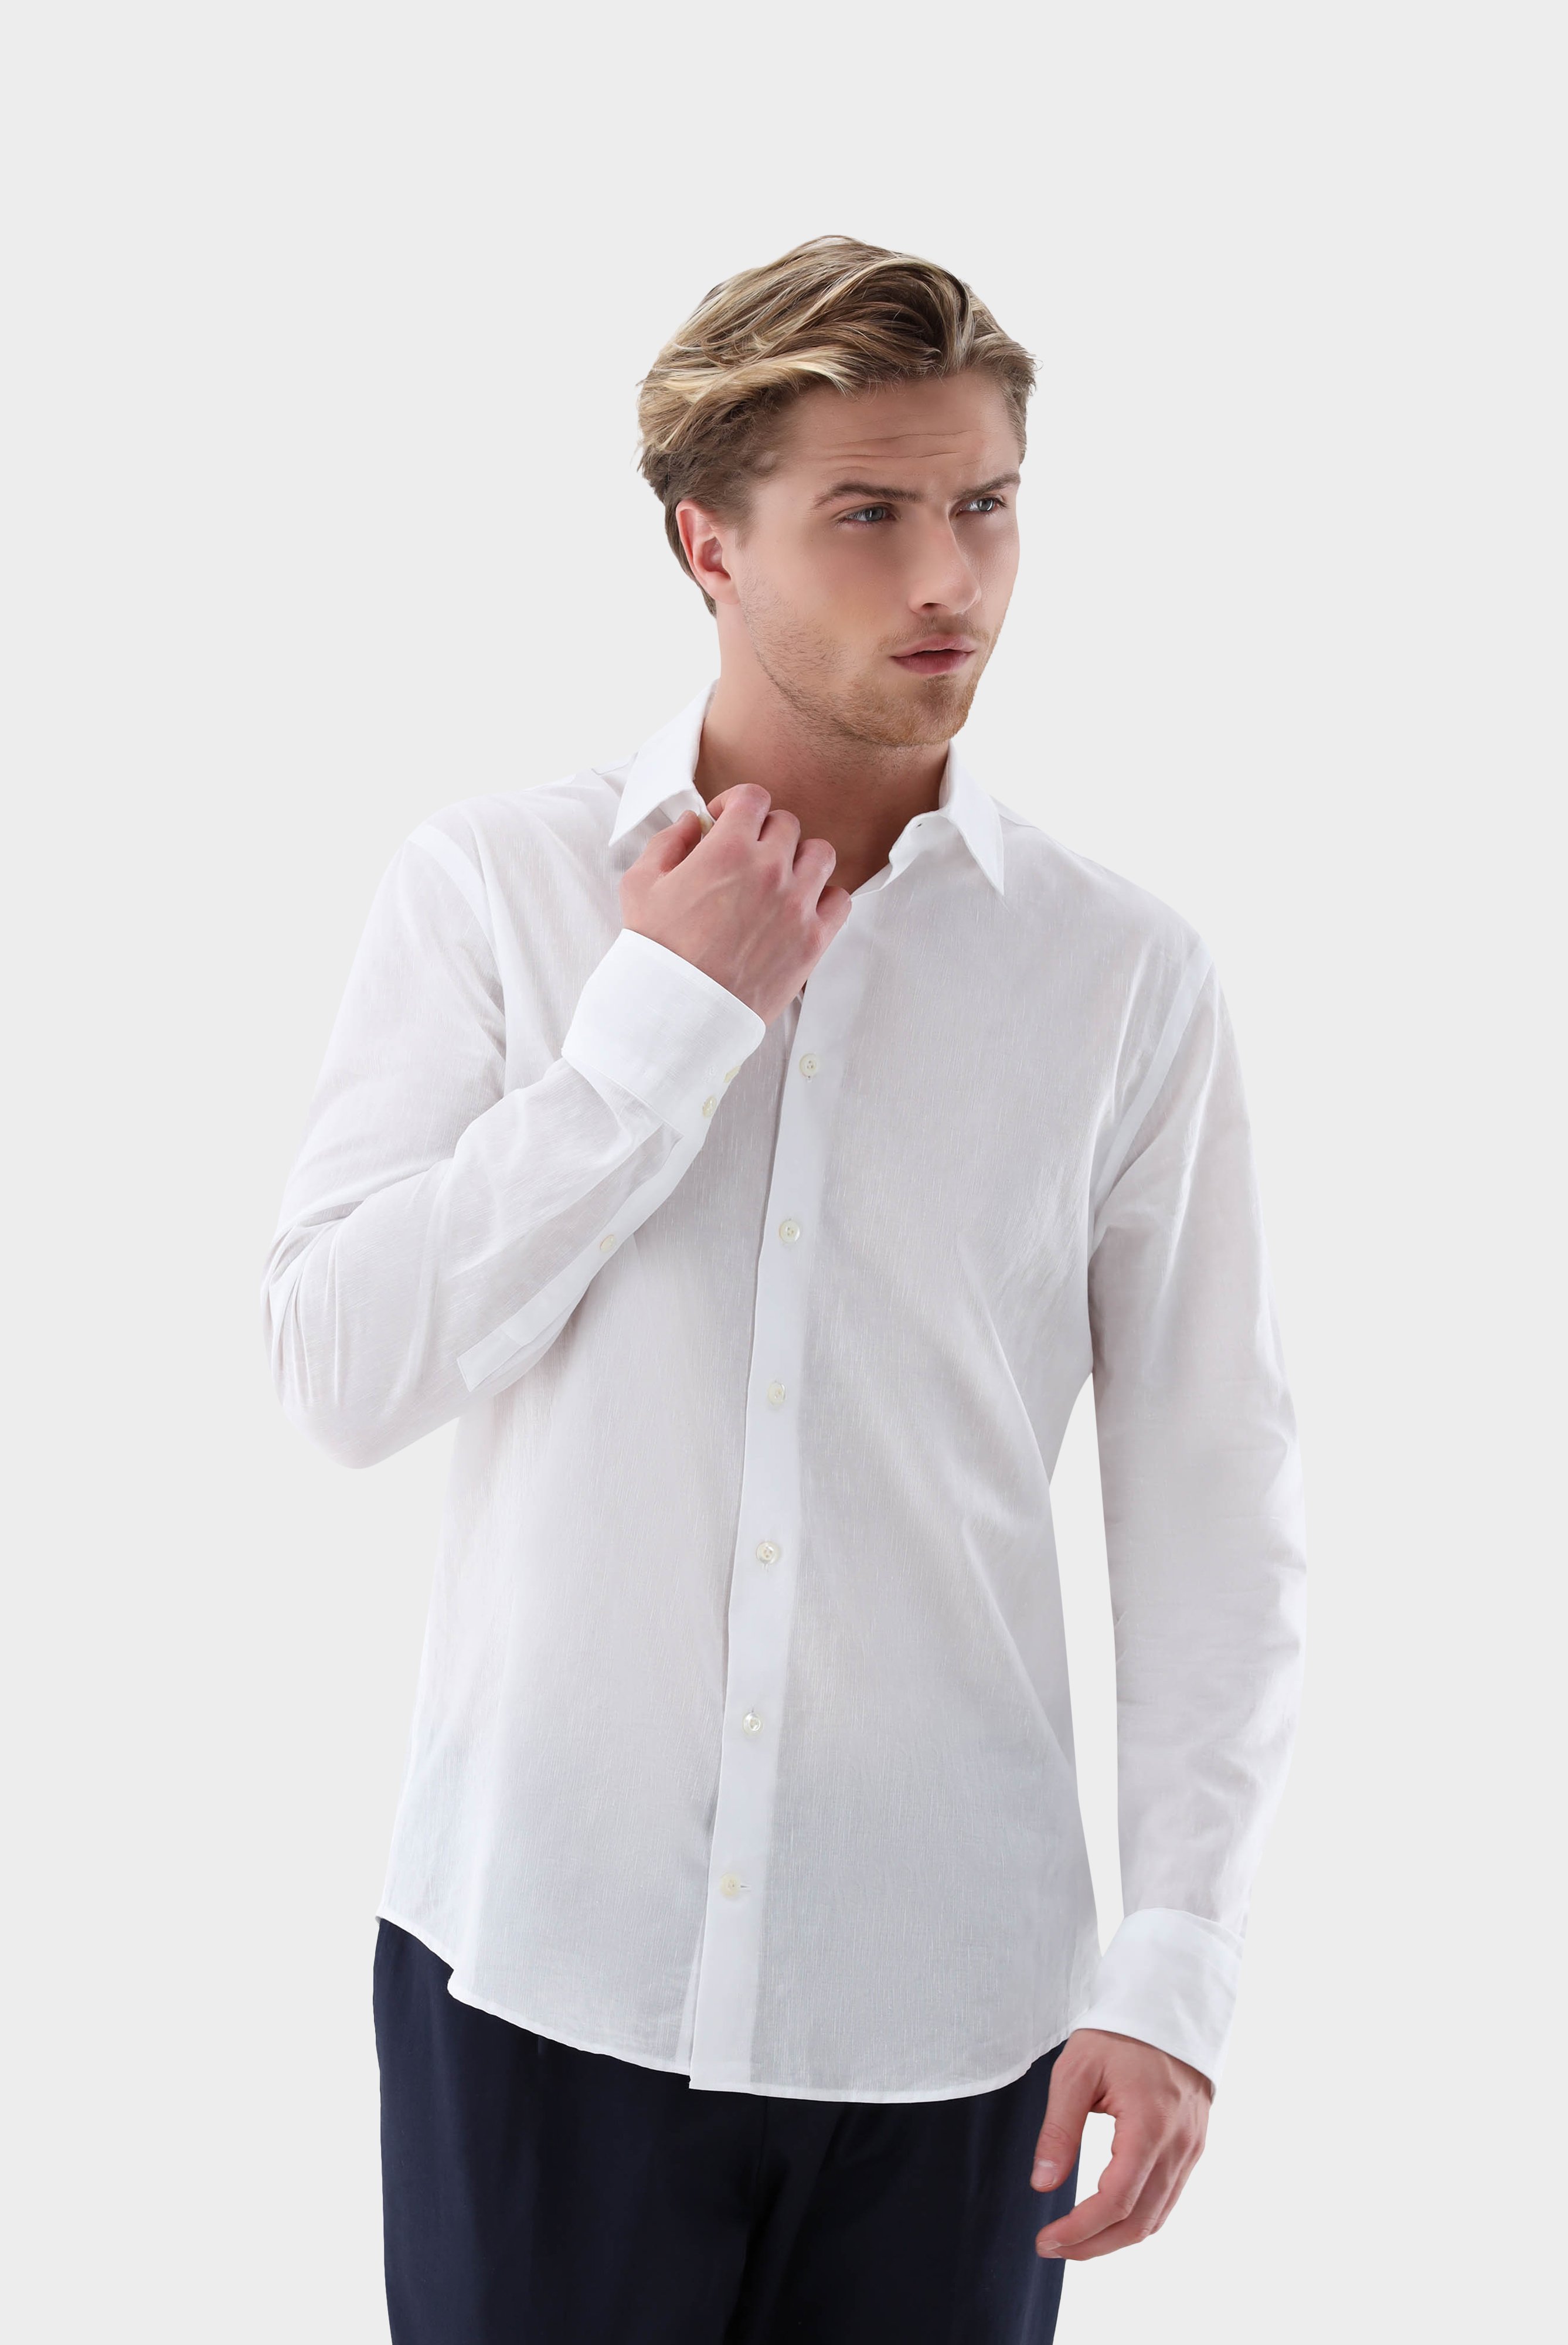 Casual Shirts+Shirt in Cotton and Linen blend Tailor Fit+20.2011.AV.151023.000.38